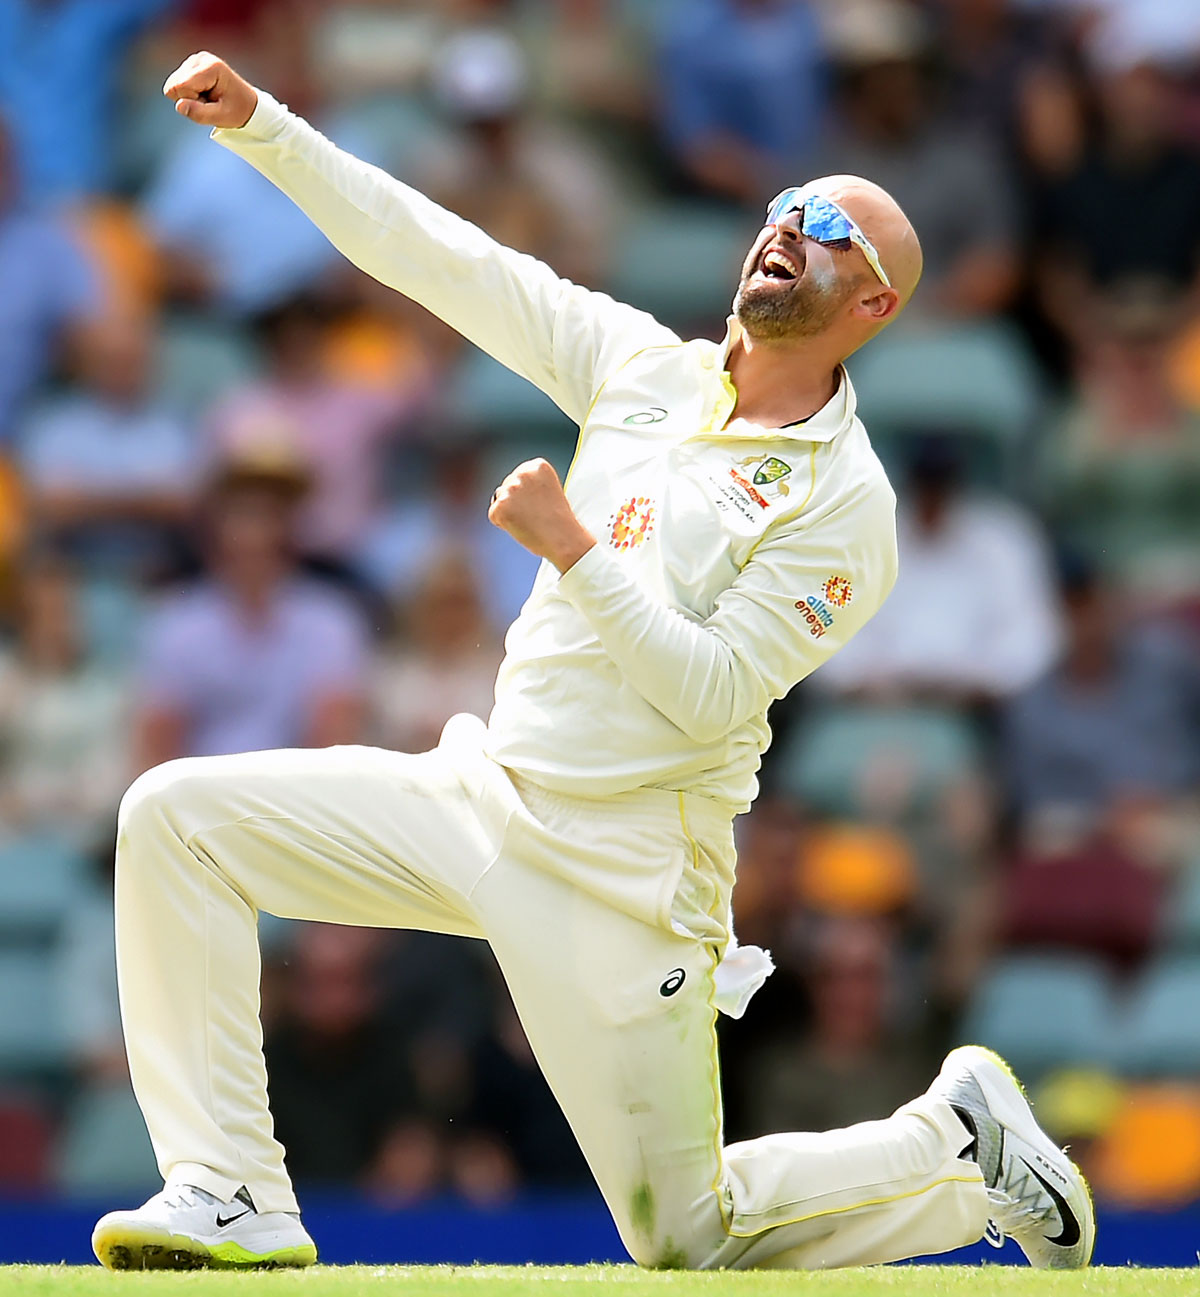 Australia spinner Nathan Lyon celebrates dismissing South Africa's Temba Bavuma during Day 2 of the first Test at The Gabba in Brisbane, on Sunday.